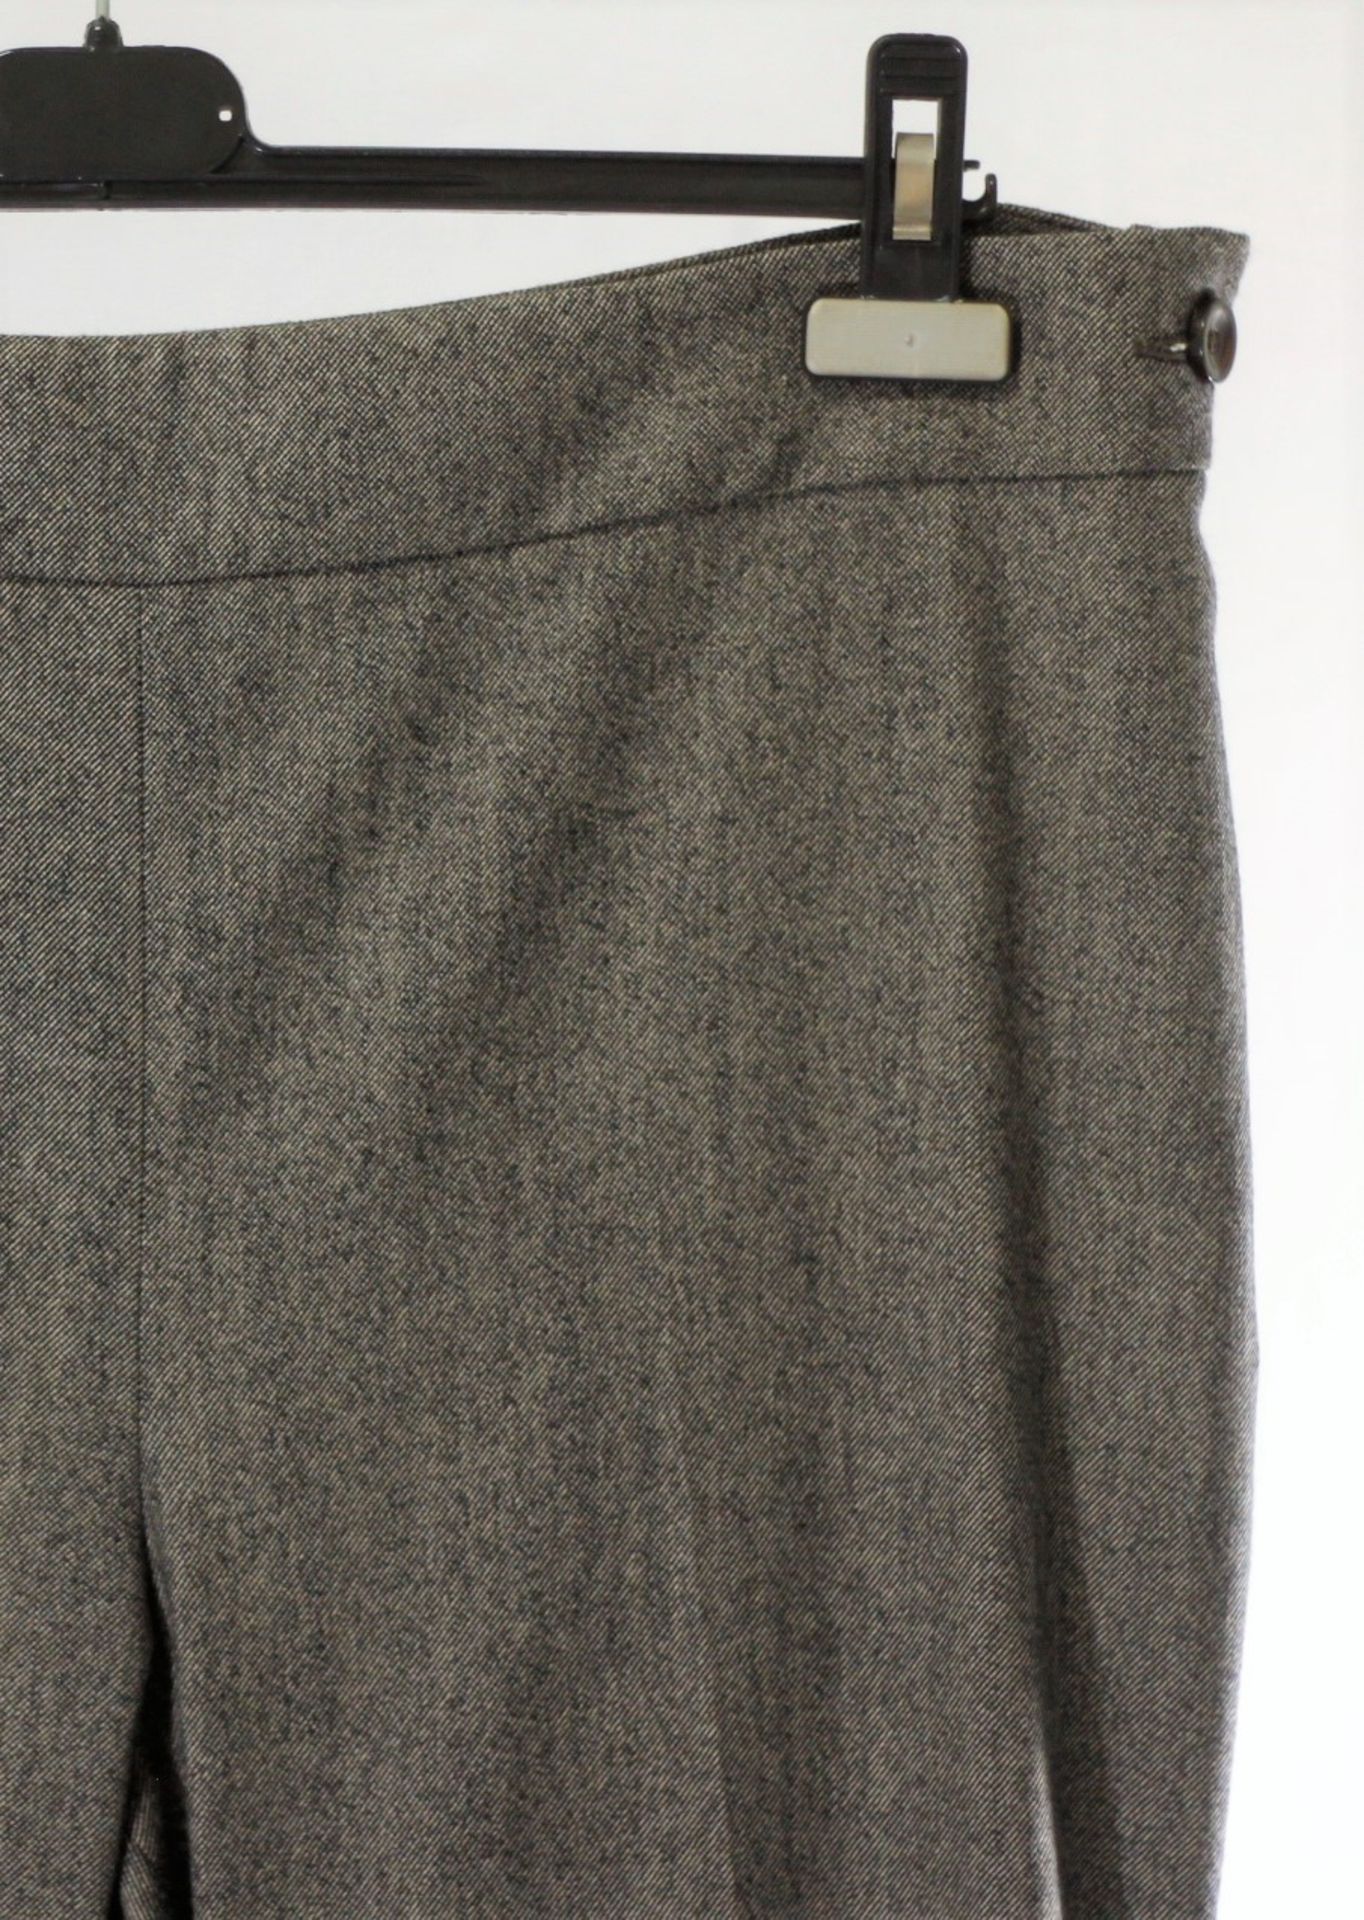 1 x Agnona Grey Tweed Trousers - Size: 22 - Material: 55% Cotton, 42% Virgin Wool, 2% Nylon, 1% - Image 6 of 6